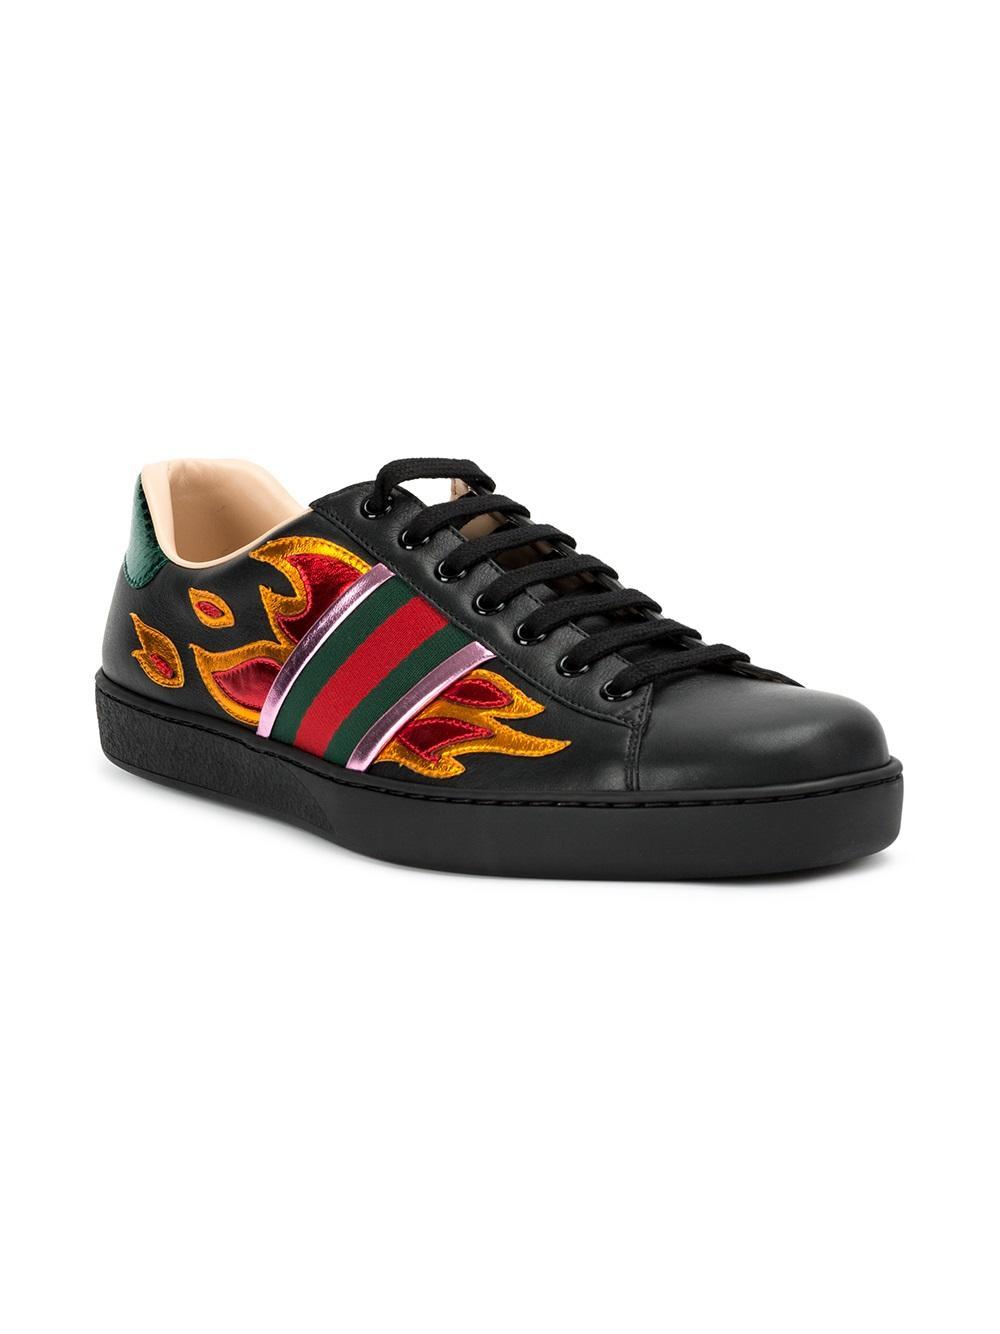 gucci fire shoes